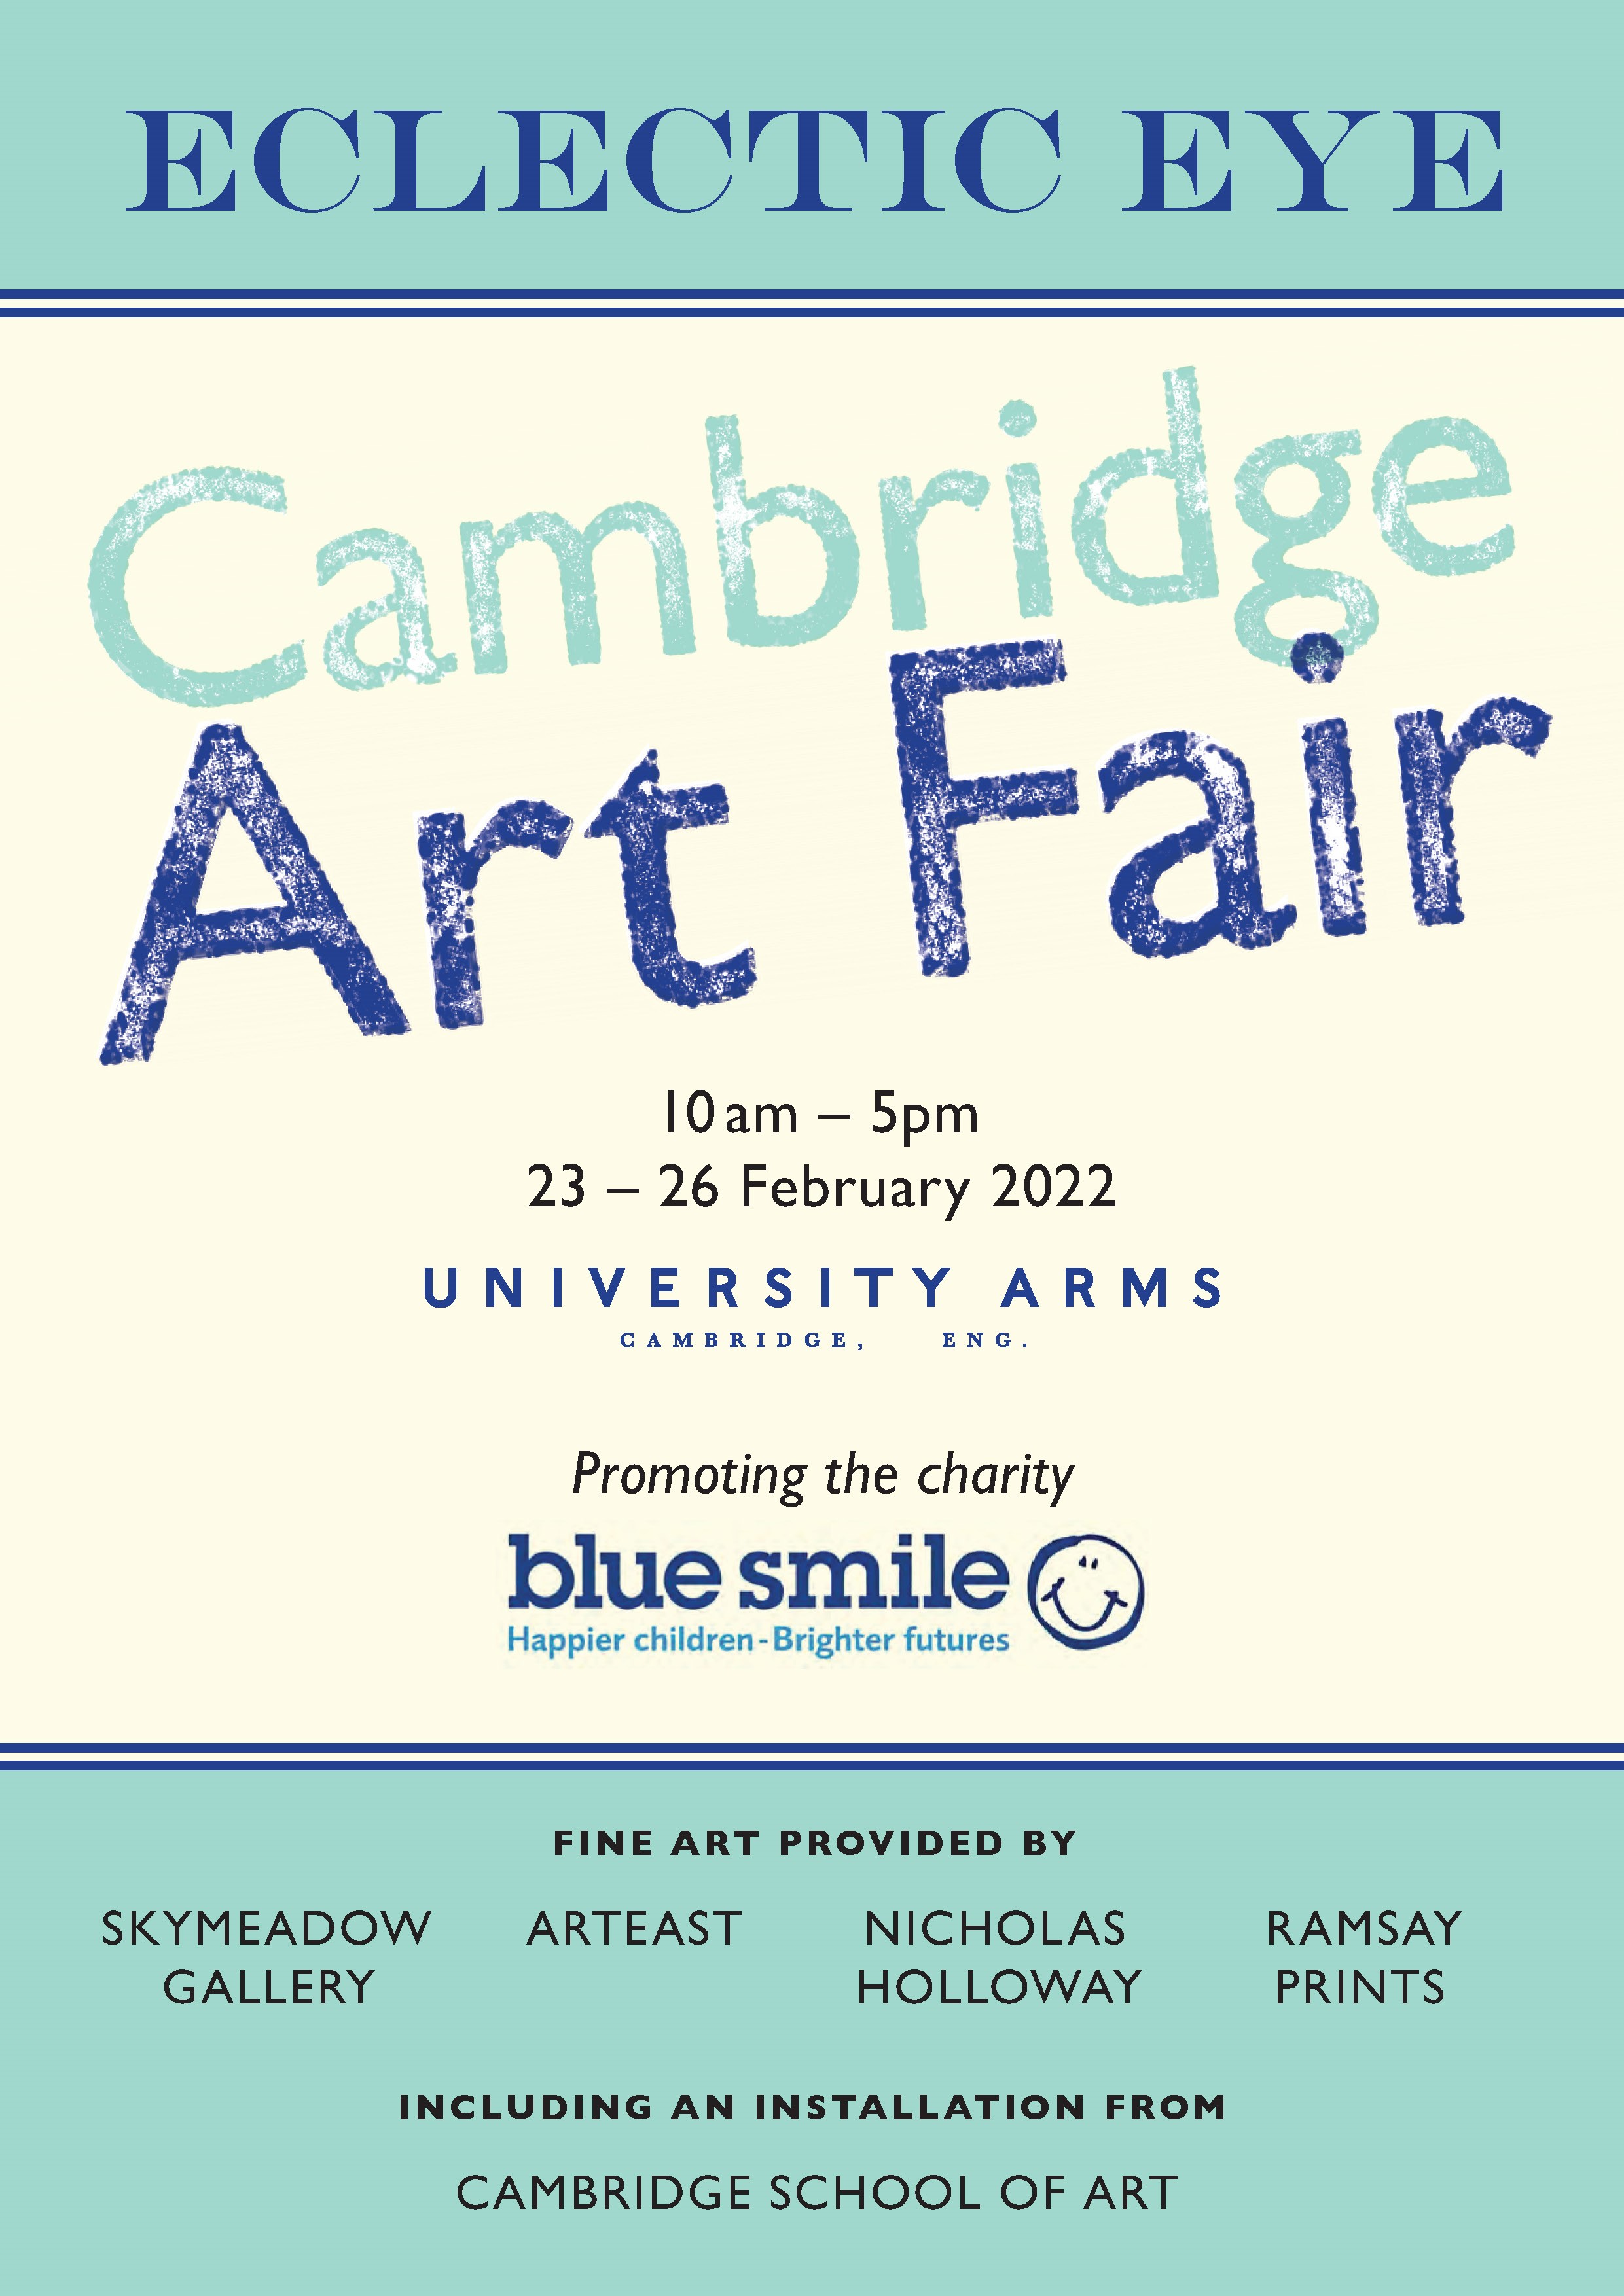 Student Pop-up Exhibition at the University Arms Hotel in Partnership with Cambridge Art Fair poster.